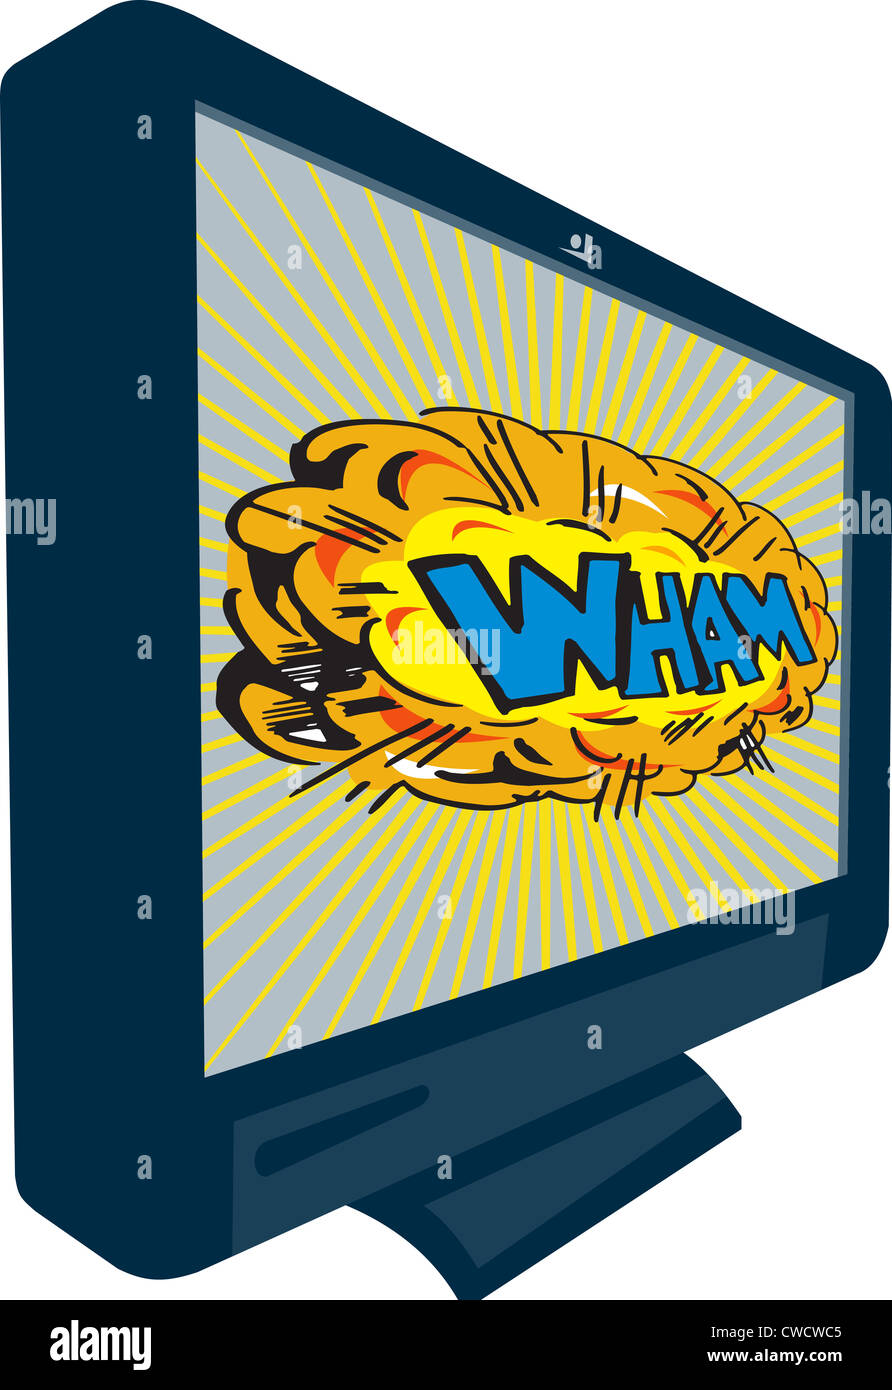 Illustration of an LCD Plasma television TV set on isolated white background with cartoon style explosion and text word wham. Stock Photo